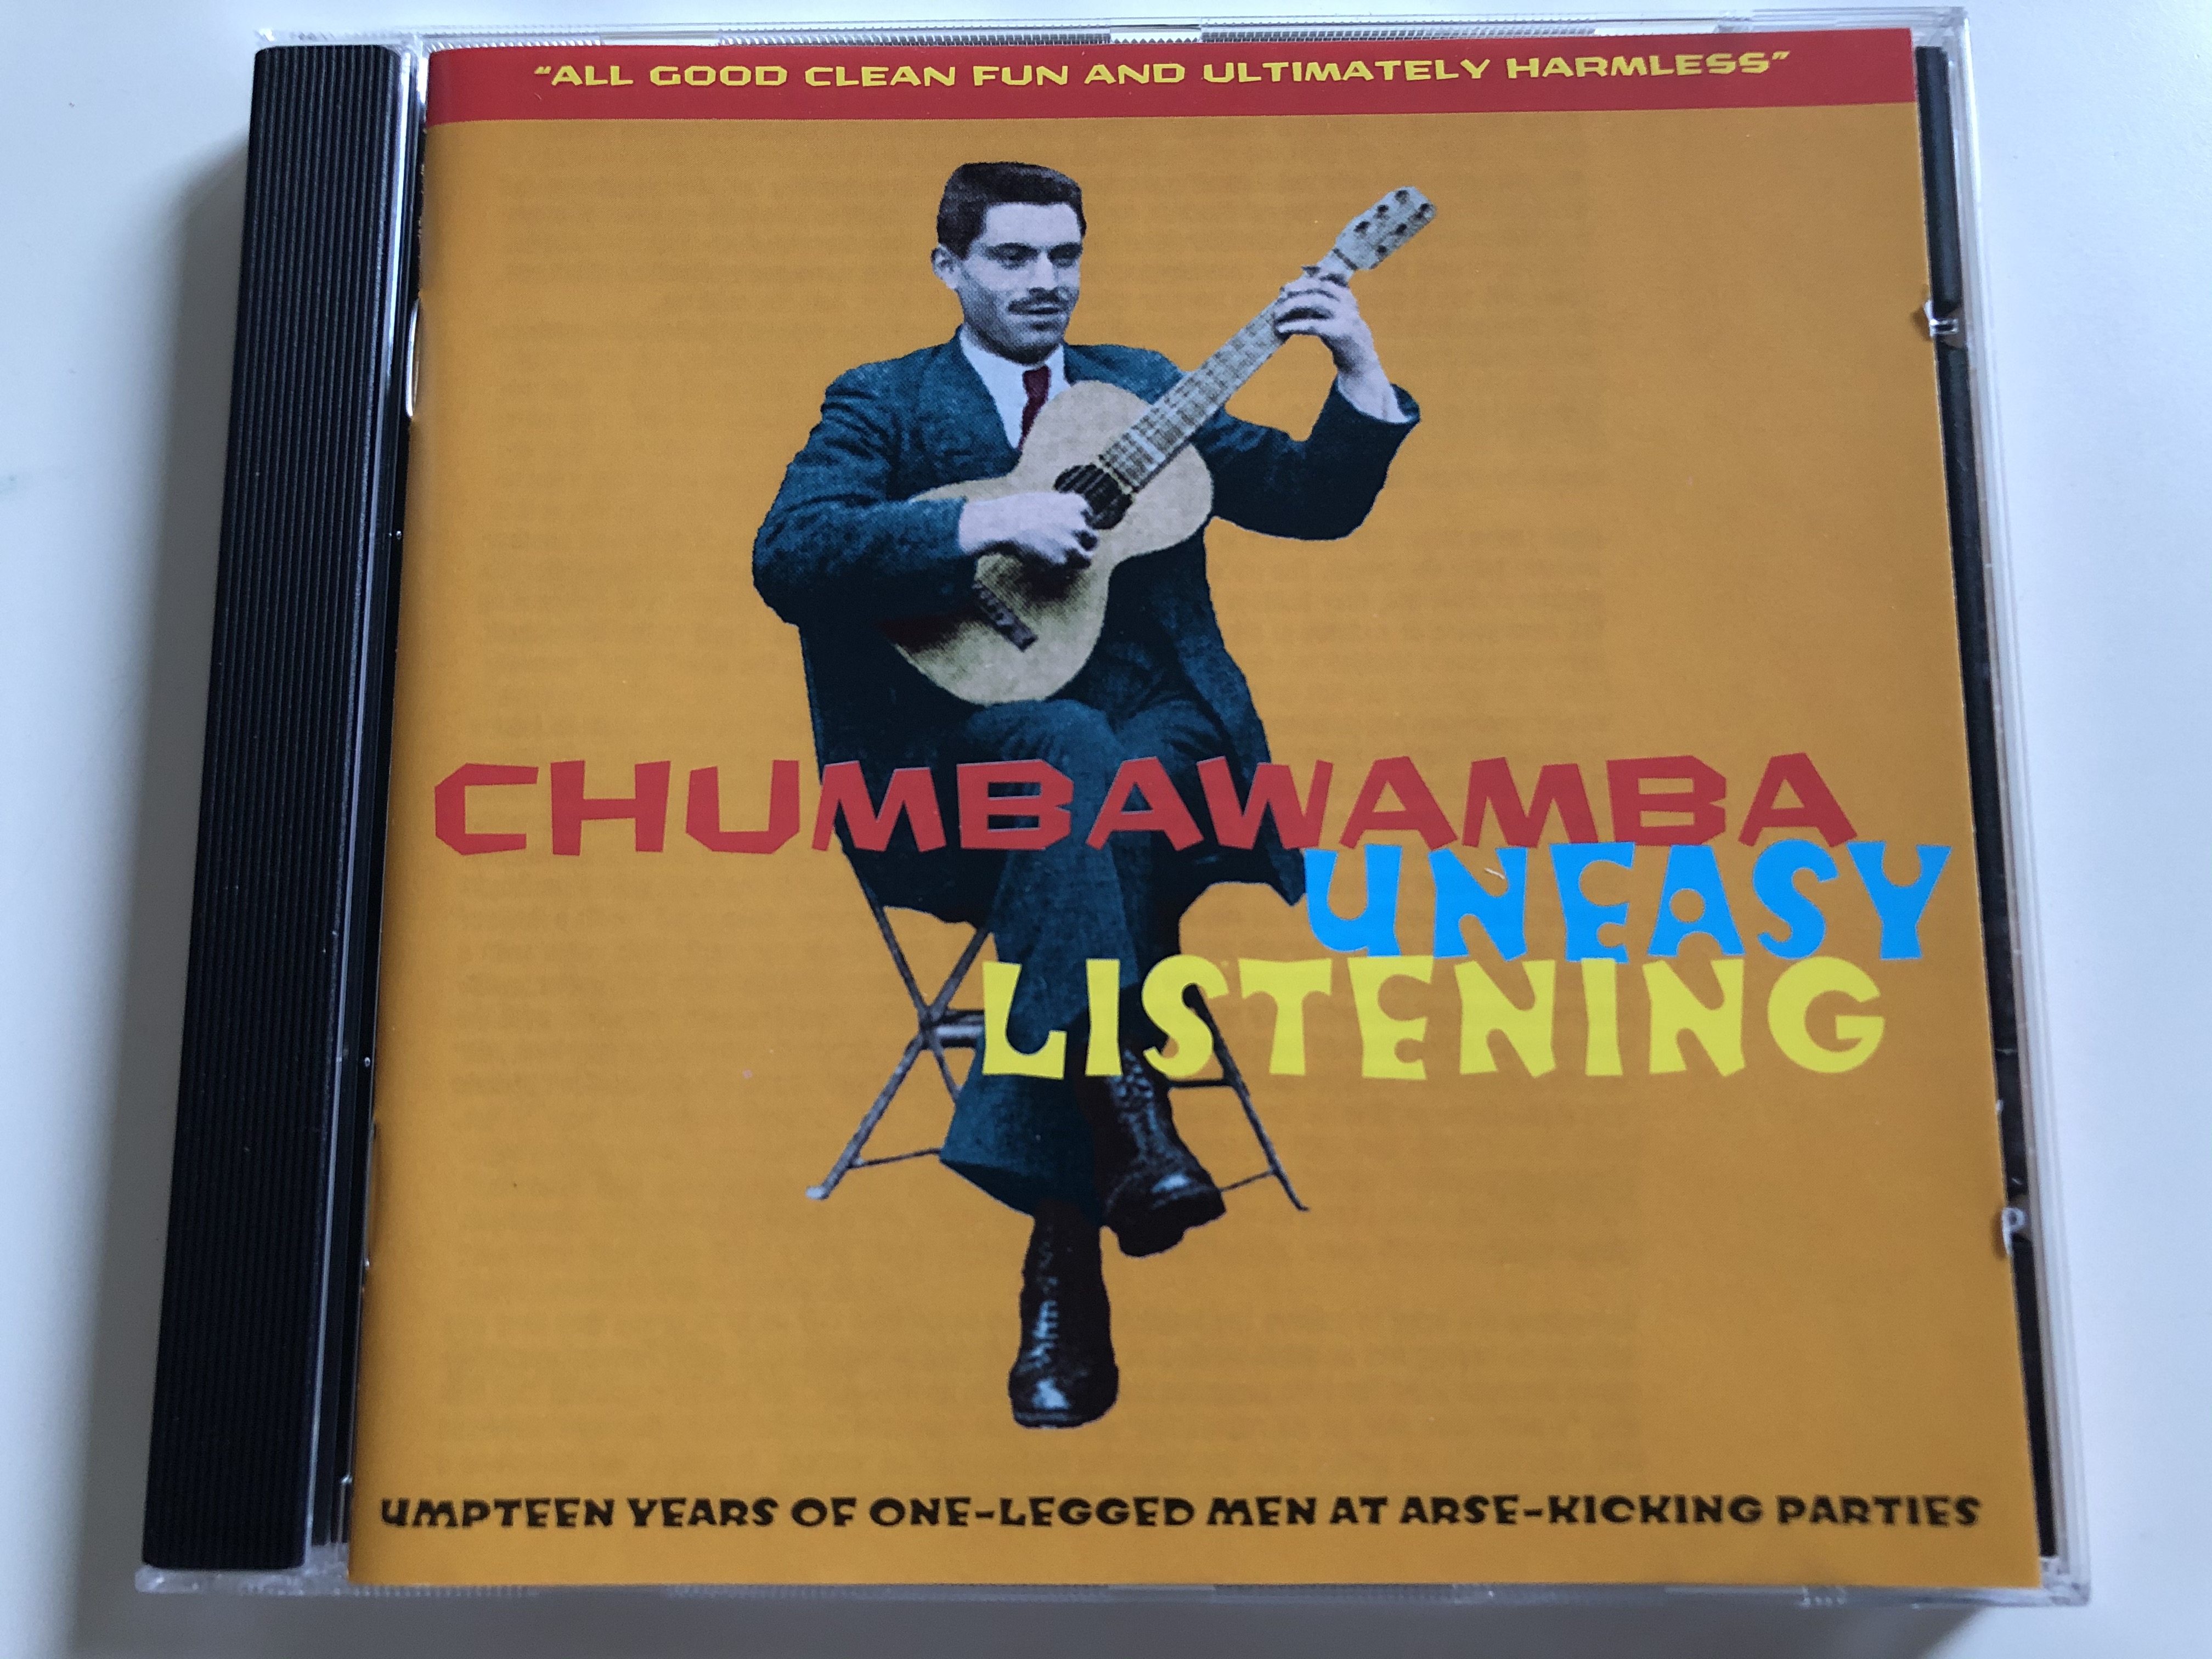 chumbawamba-uneasy-listening-all-good-clean-fun-and-ultimately-harmless-umpteen-years-of-one-legged-men-at-arse-kicking-parties-emi-audio-cd-1998-72434981792-1-.jpg